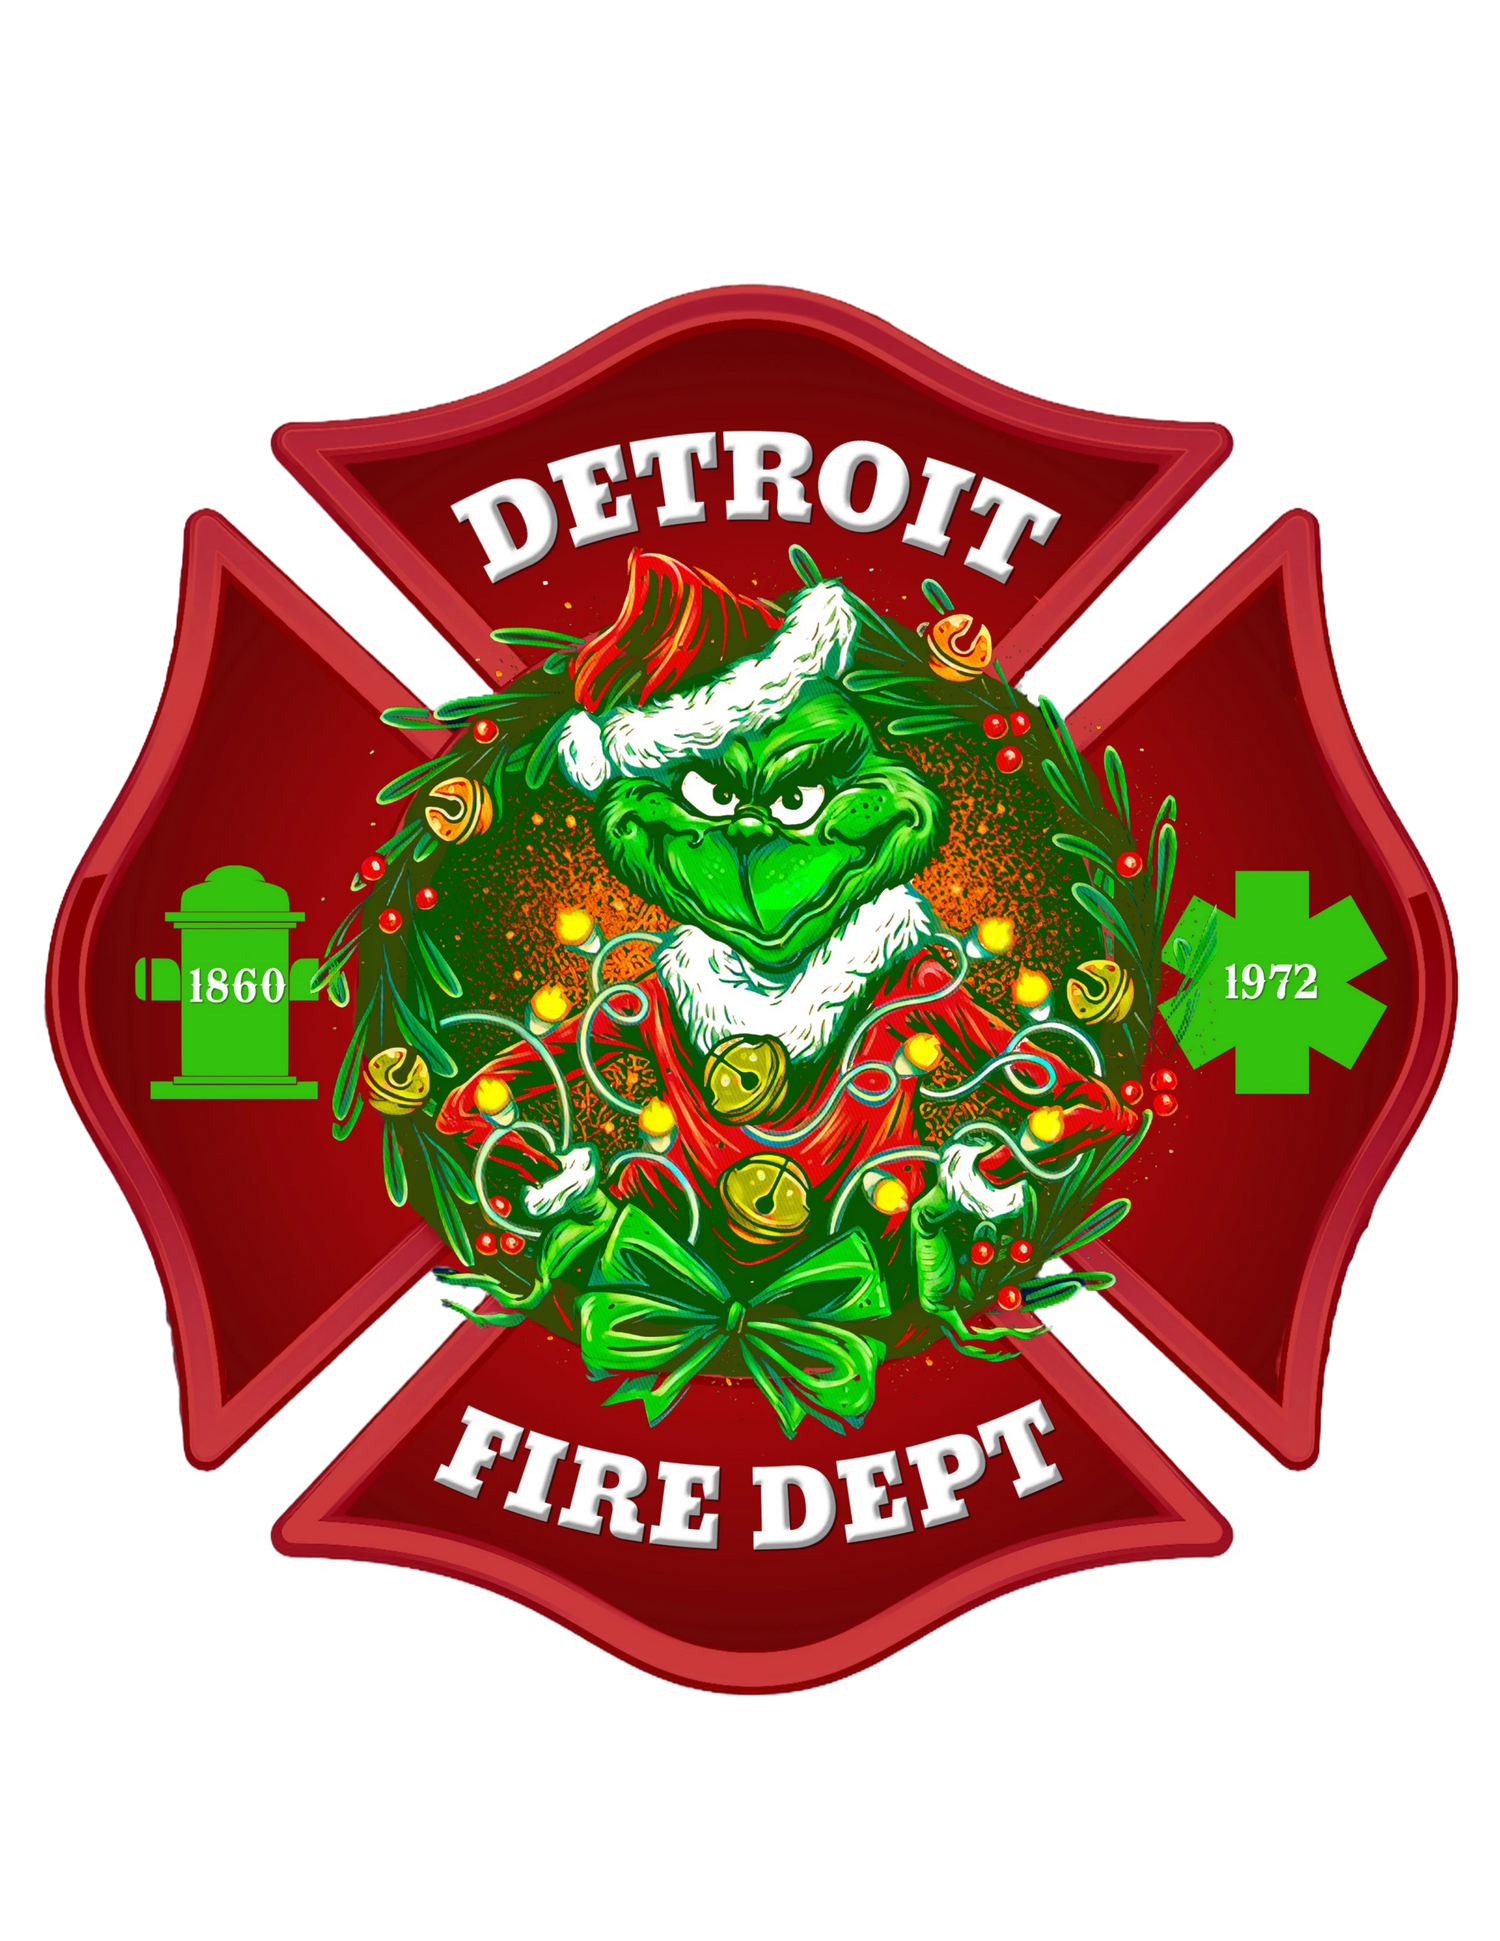 THE GRINCH x DFD HOLIDAY FUNDRAISER